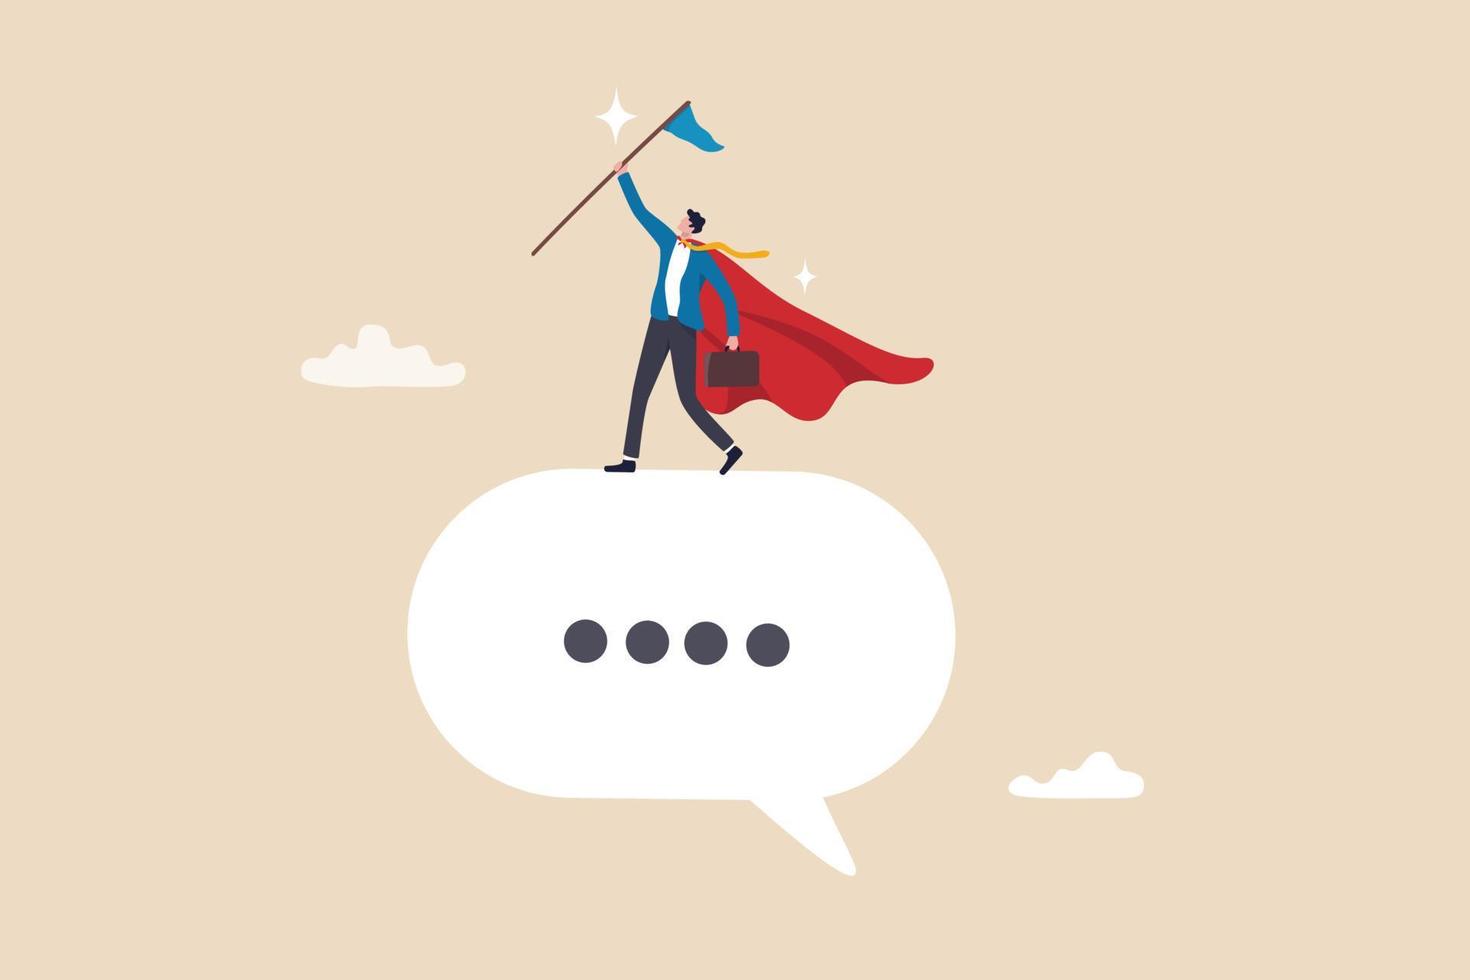 Communicate for success, communication skill, sending message, meeting discussion or advertising message to customer concept, success businessman superhero holding winning flag on speech bubble. vector